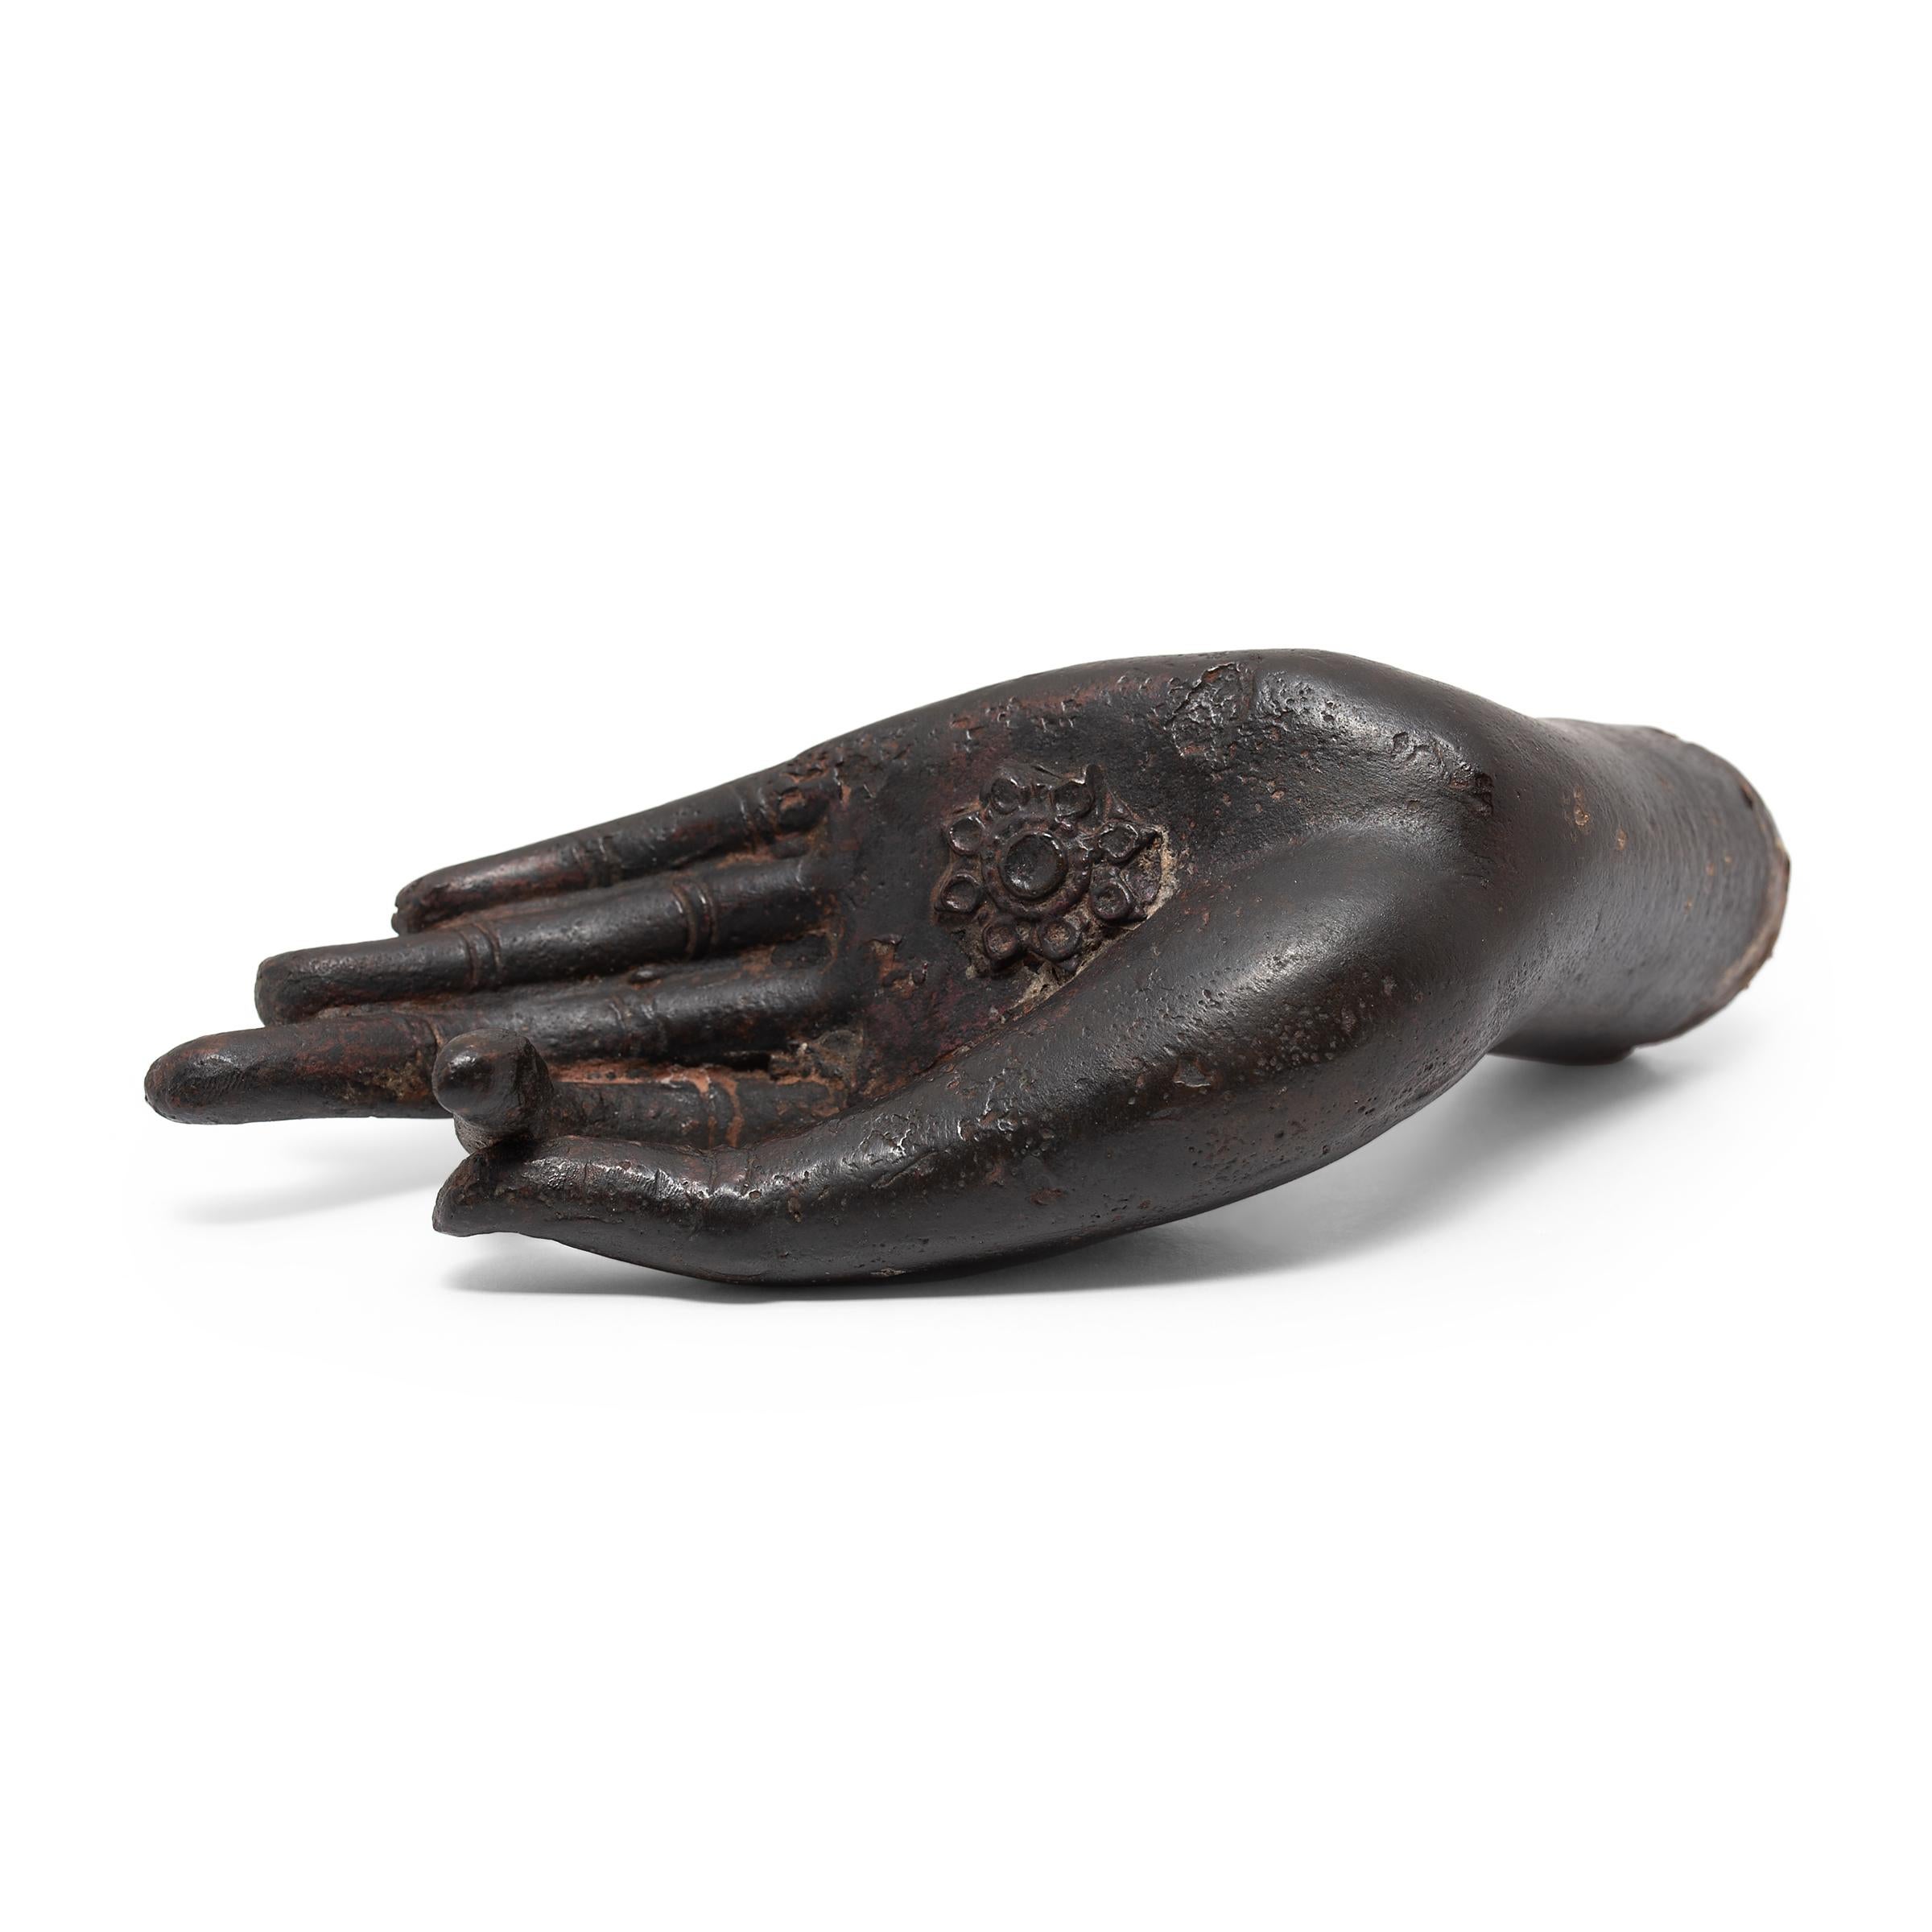 This 19th-century Buddha's hand sculpture from Thailand is finely cast of bronze with lifelike features and a beautifully dark patina. The slender left hand is held gracefully in vitarka mudra, a part of the gesture of teaching and intellectual